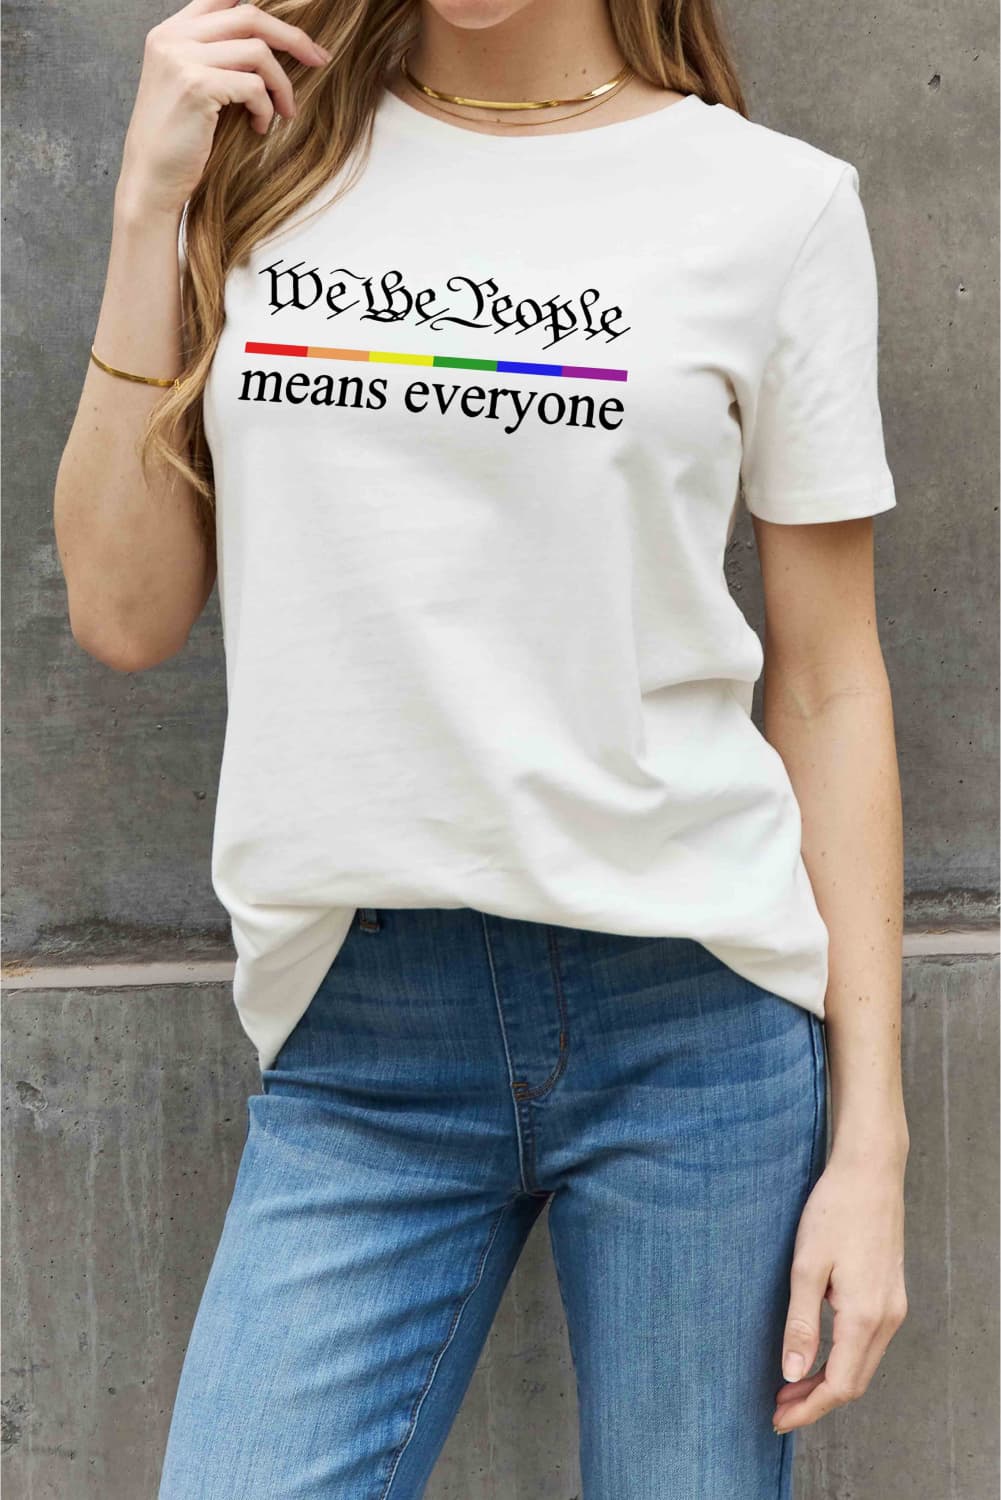 Simply Love, Full Size MEANS EVERYONE Graphic Cotton Tee